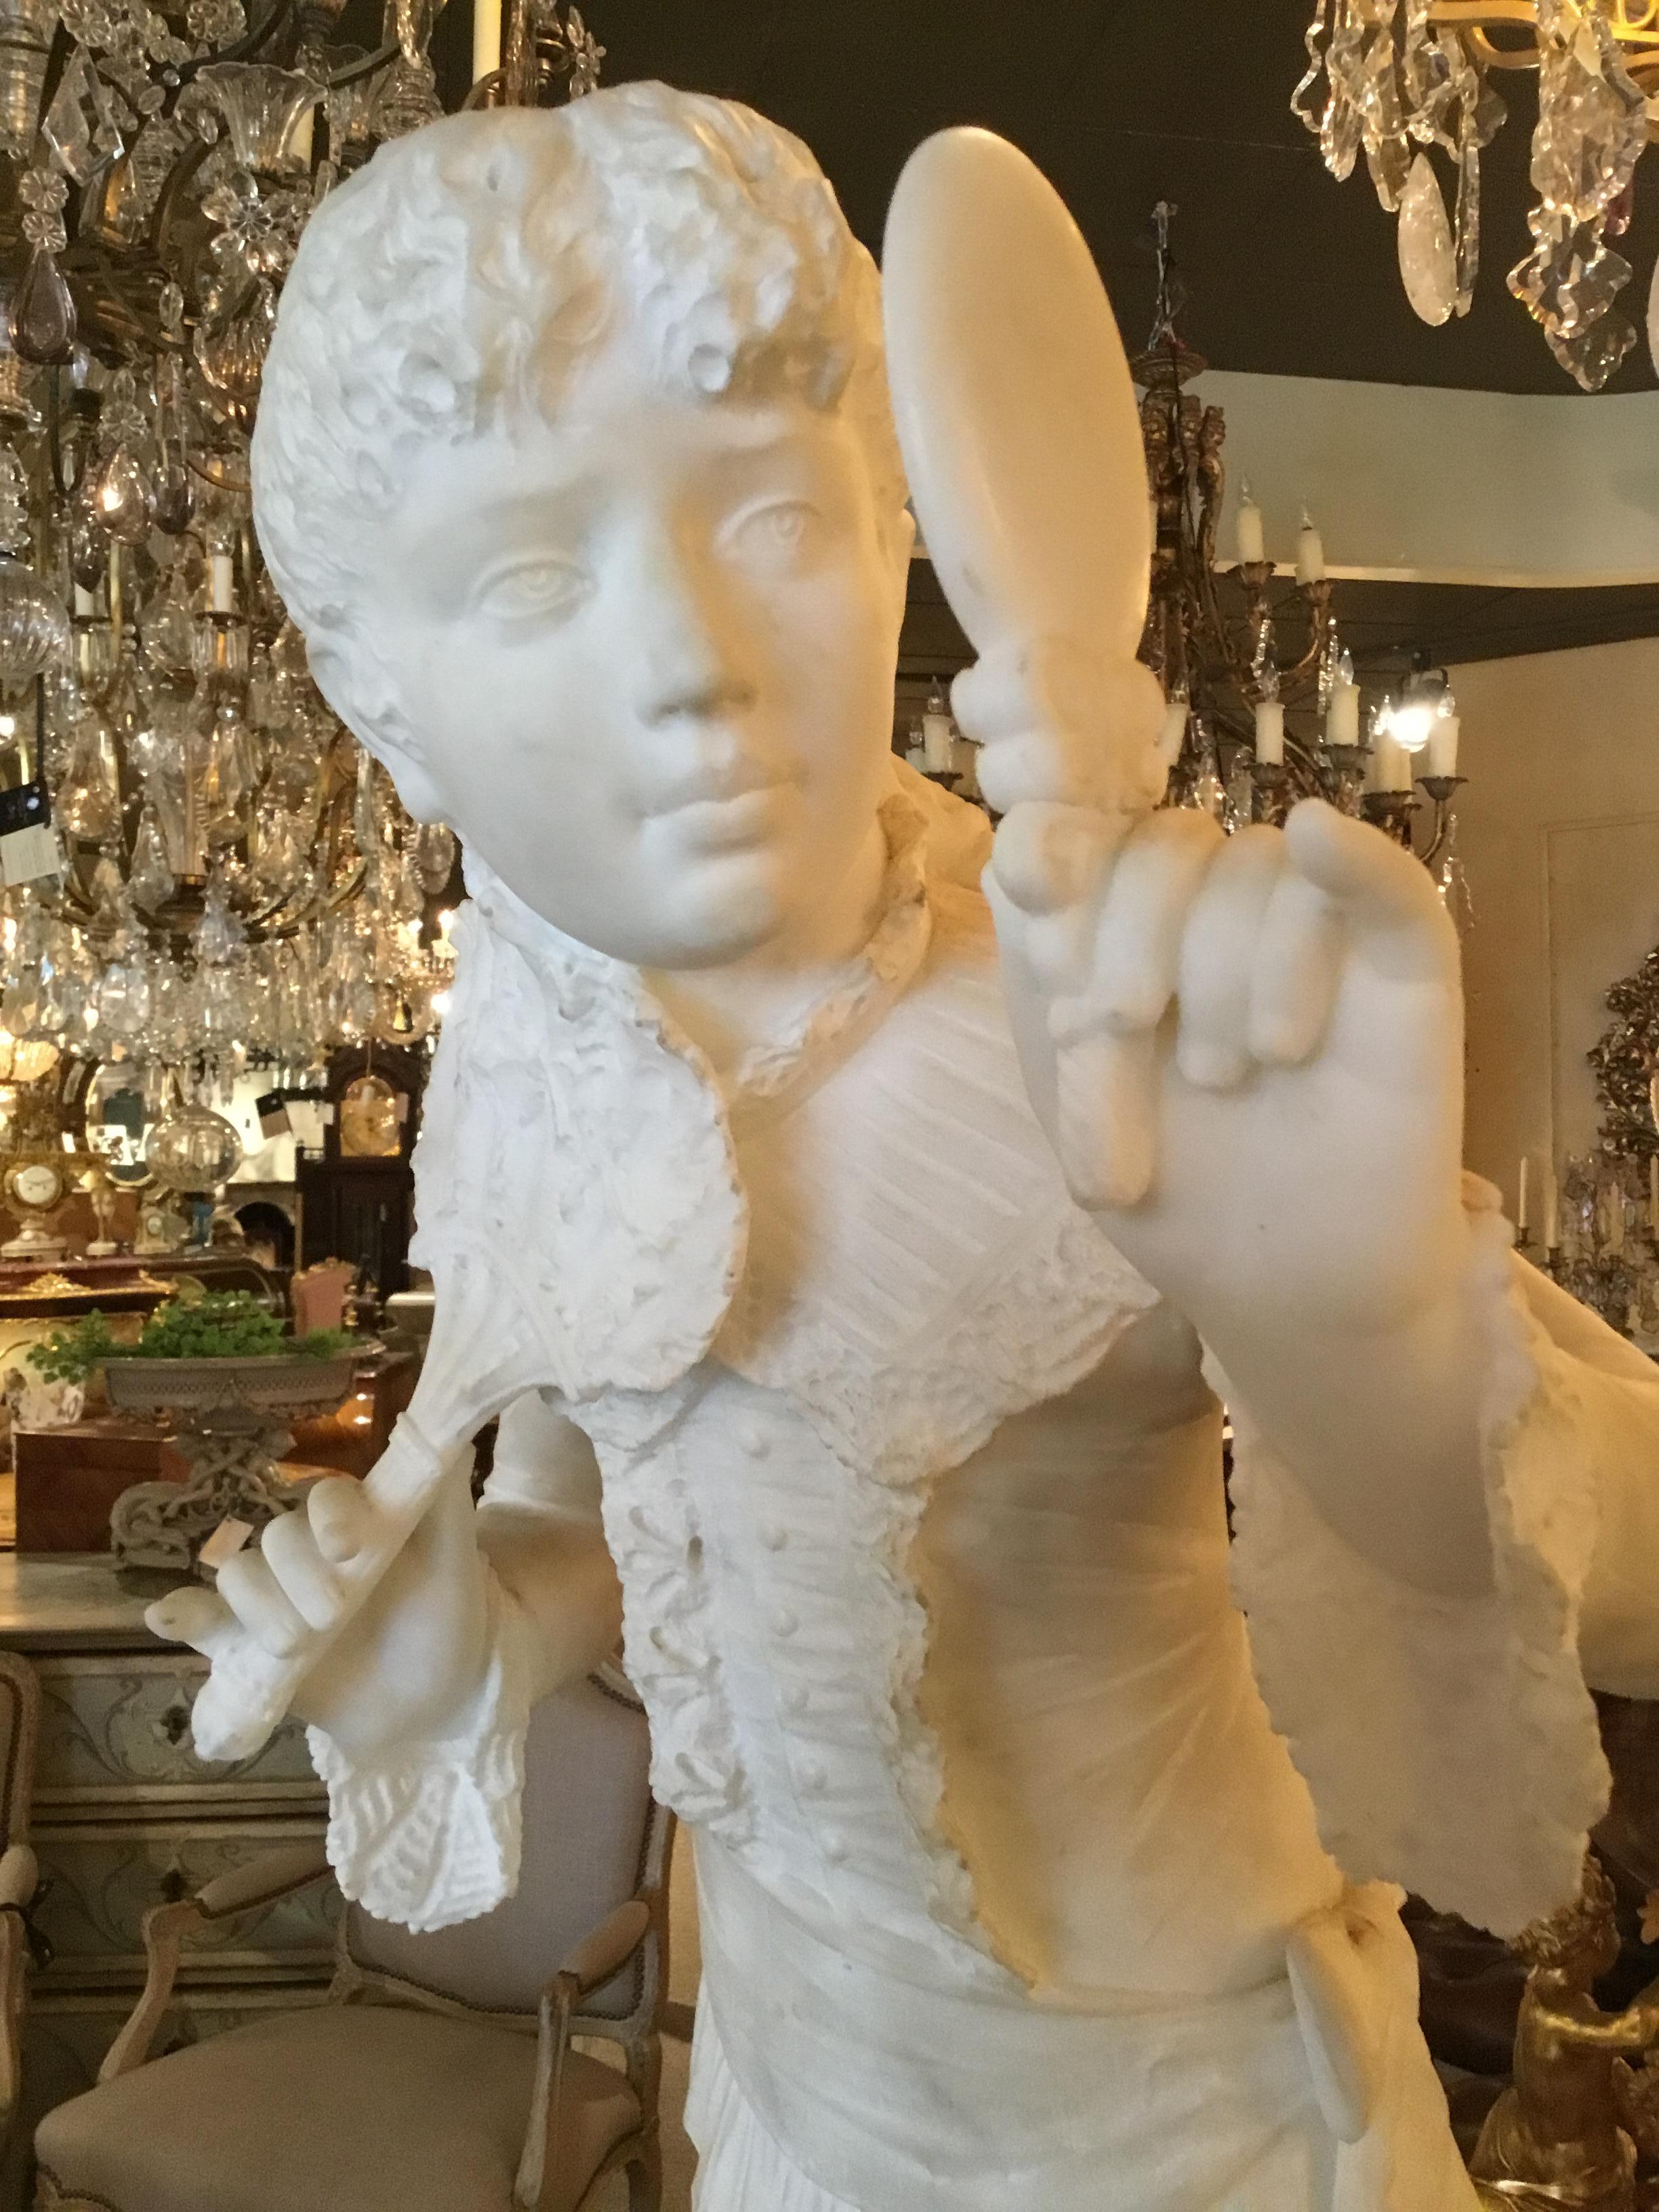 Lovely statue of a young girl gazing into a mirror and holding a hand fan.
Well carved.